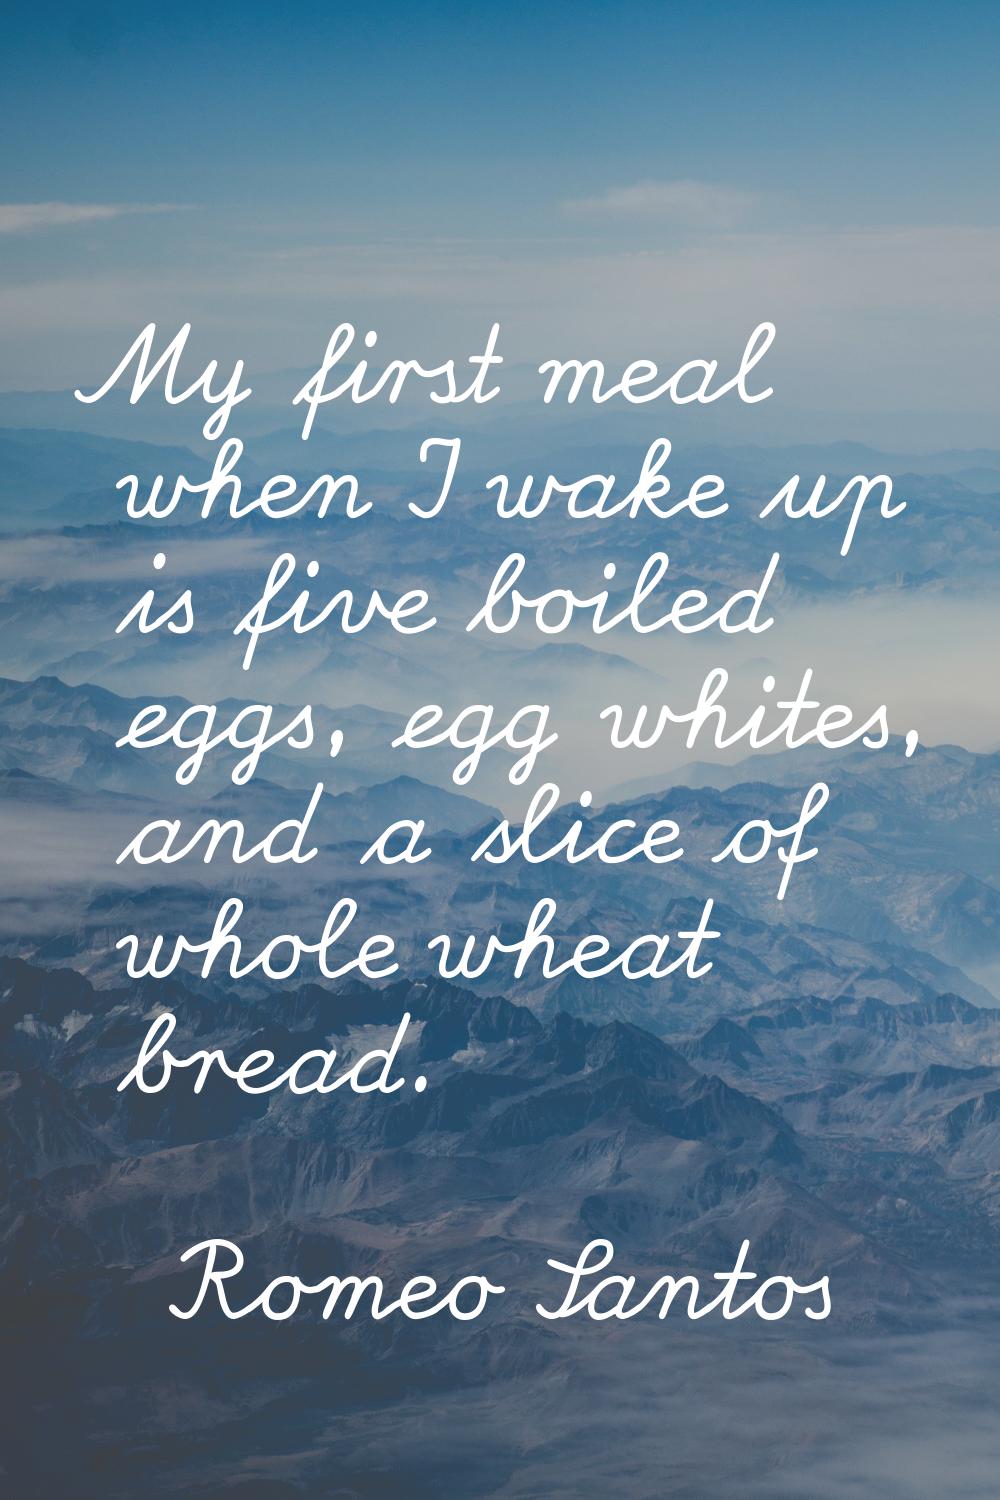 My first meal when I wake up is five boiled eggs, egg whites, and a slice of whole wheat bread.